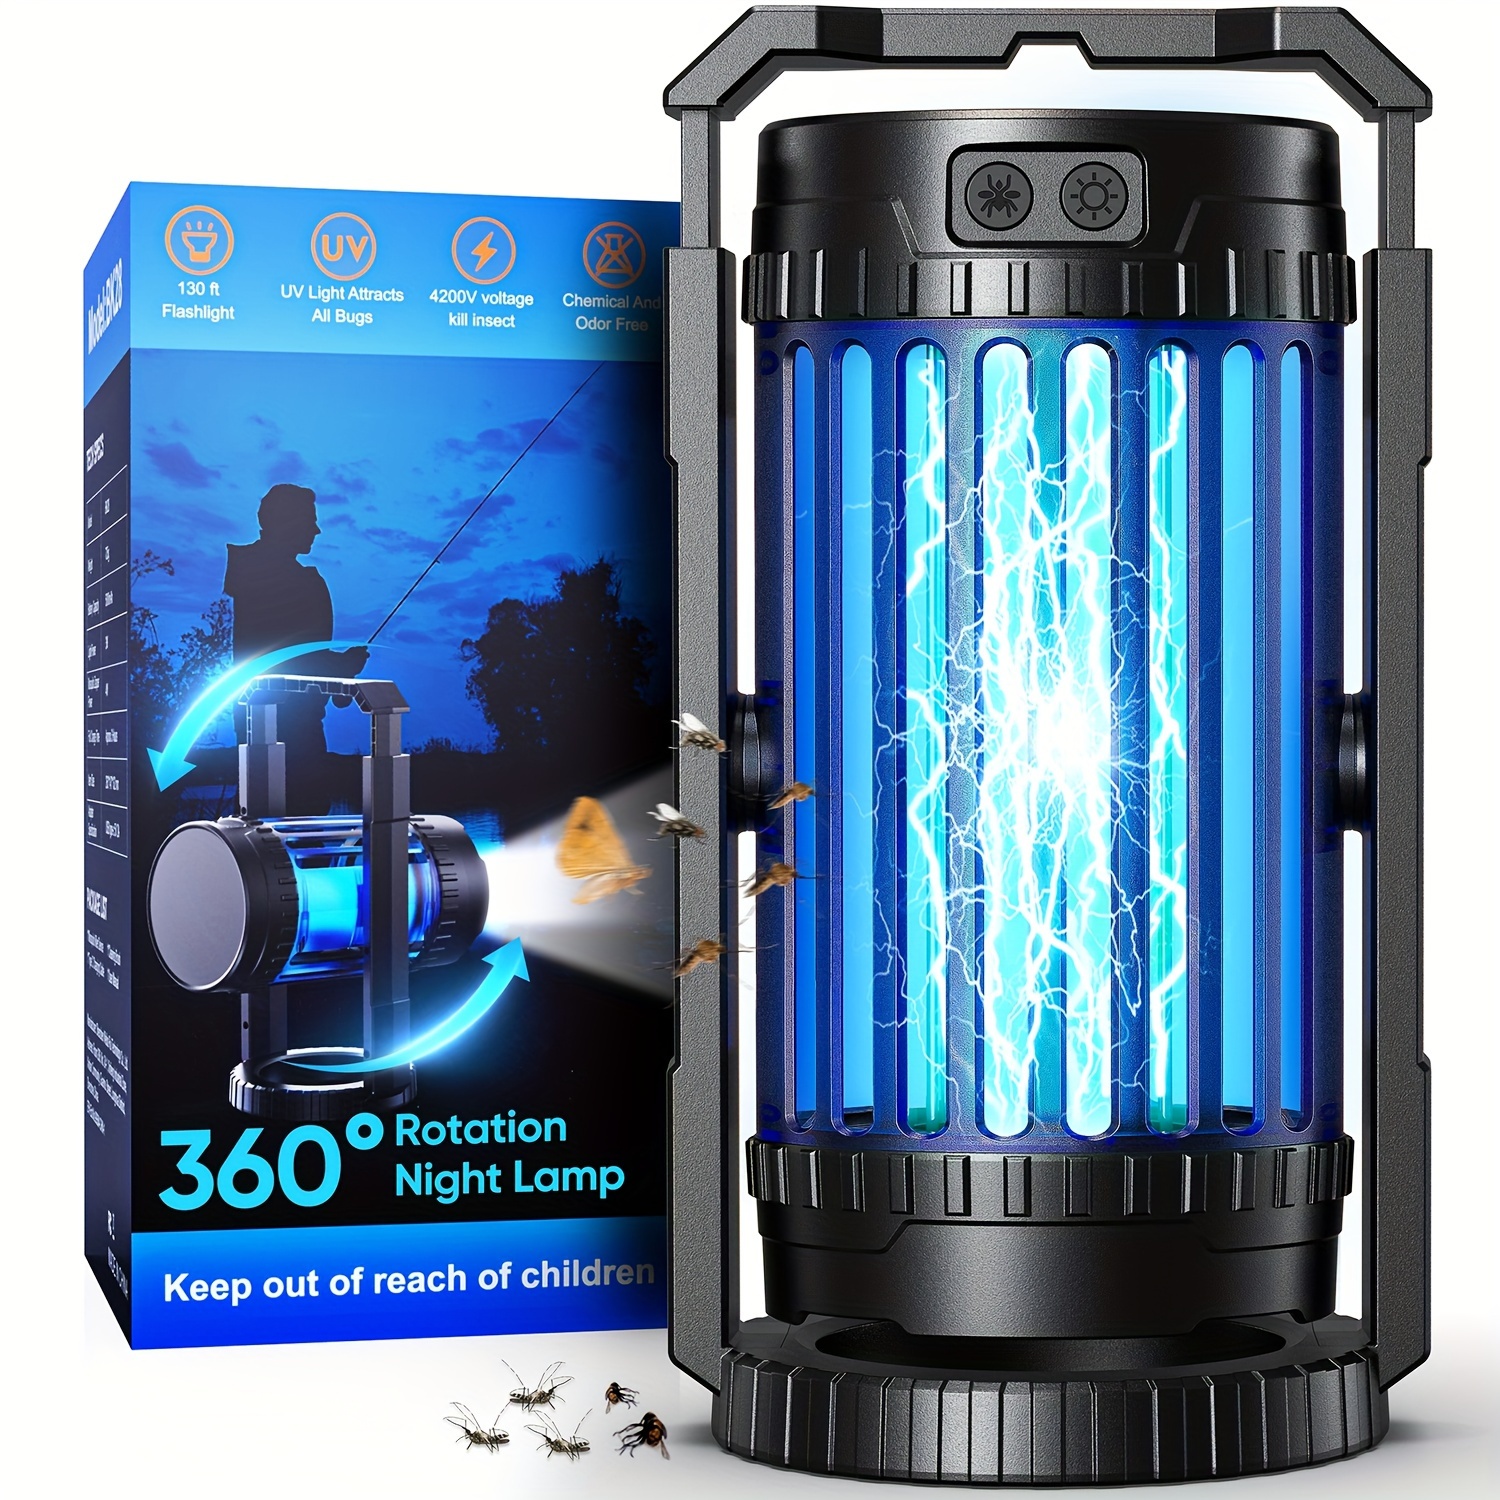 

Bug Zapper Outdoor, Zapper 4 In 1 Fly Zapper With 5000mah Battery, Portable & Rechargeable Bug Zapper Outdoor Indoor With Spotlights For Camping, Fishing, Patio, Garden, Kitchen